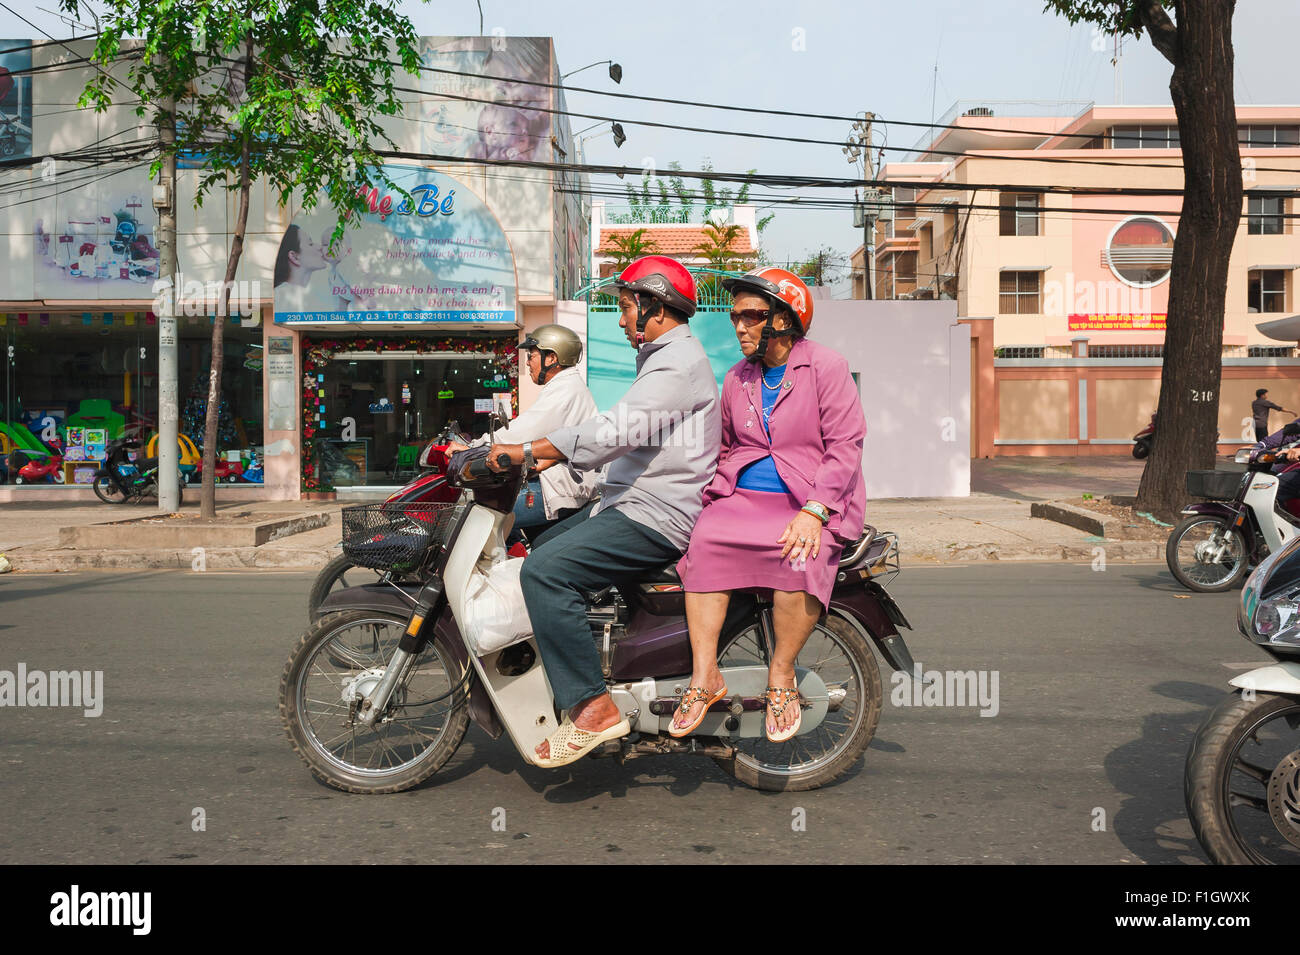 Senior people motorbike, an elderly couple speed through rush-hour traffic on a motorcycle in Tran Hung Dao in Ho Chi Minh City, Saigon, Vietnam Stock Photo